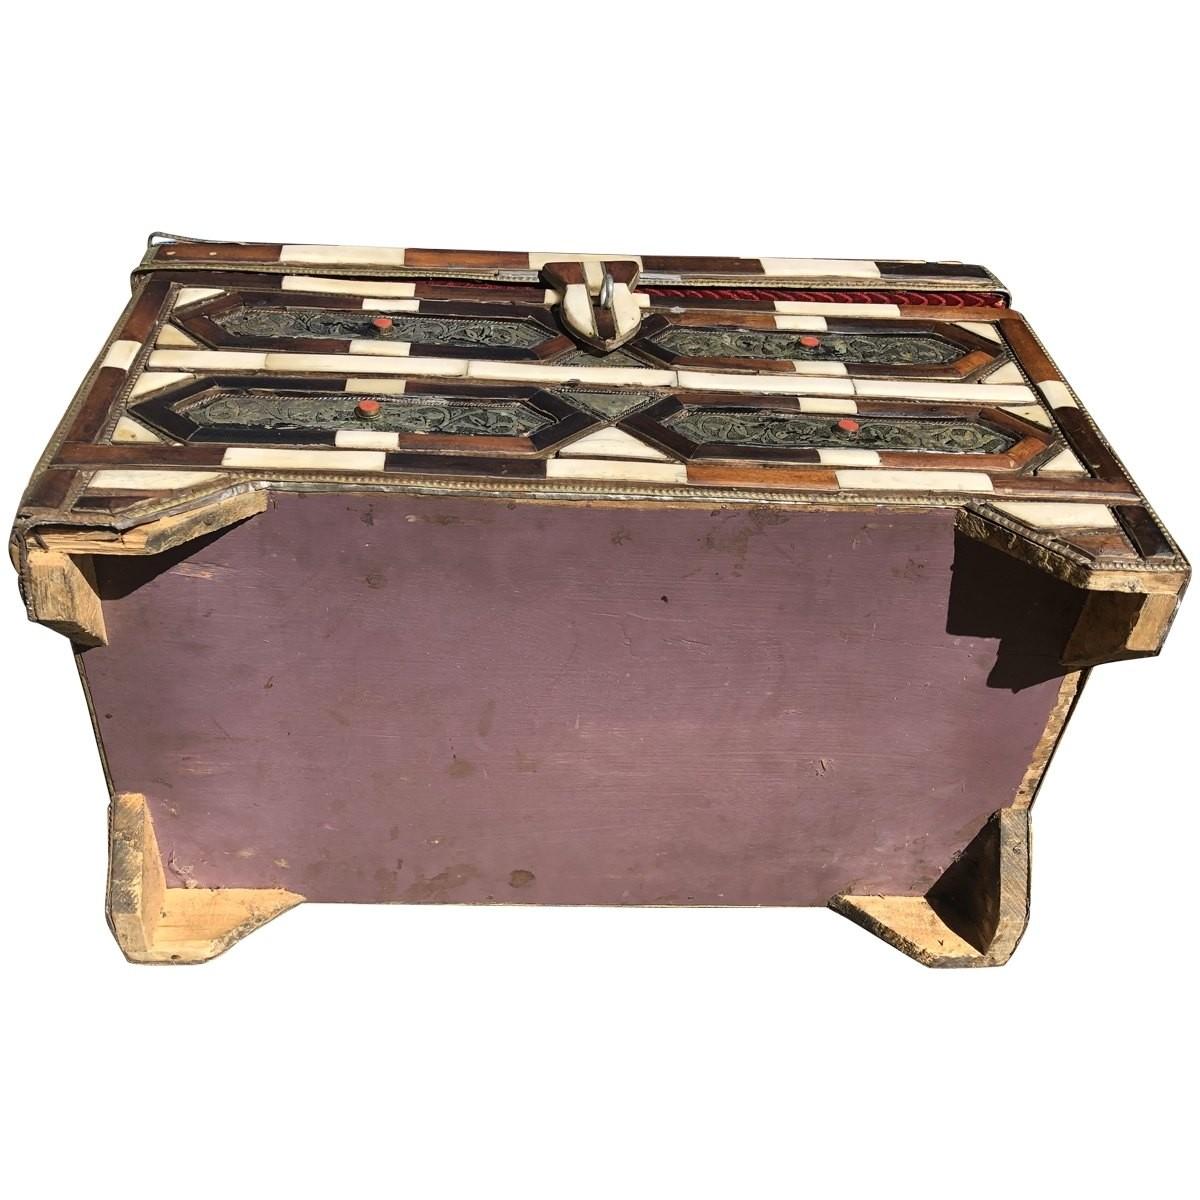 Moroccan art and furniture is defined by ornate decorations and colorful detailing. This Moroccan dowry trunk is made with a hinged lid overlaid with bone and wood. It features stamped and rope metal accents, as well as a red velvet lined